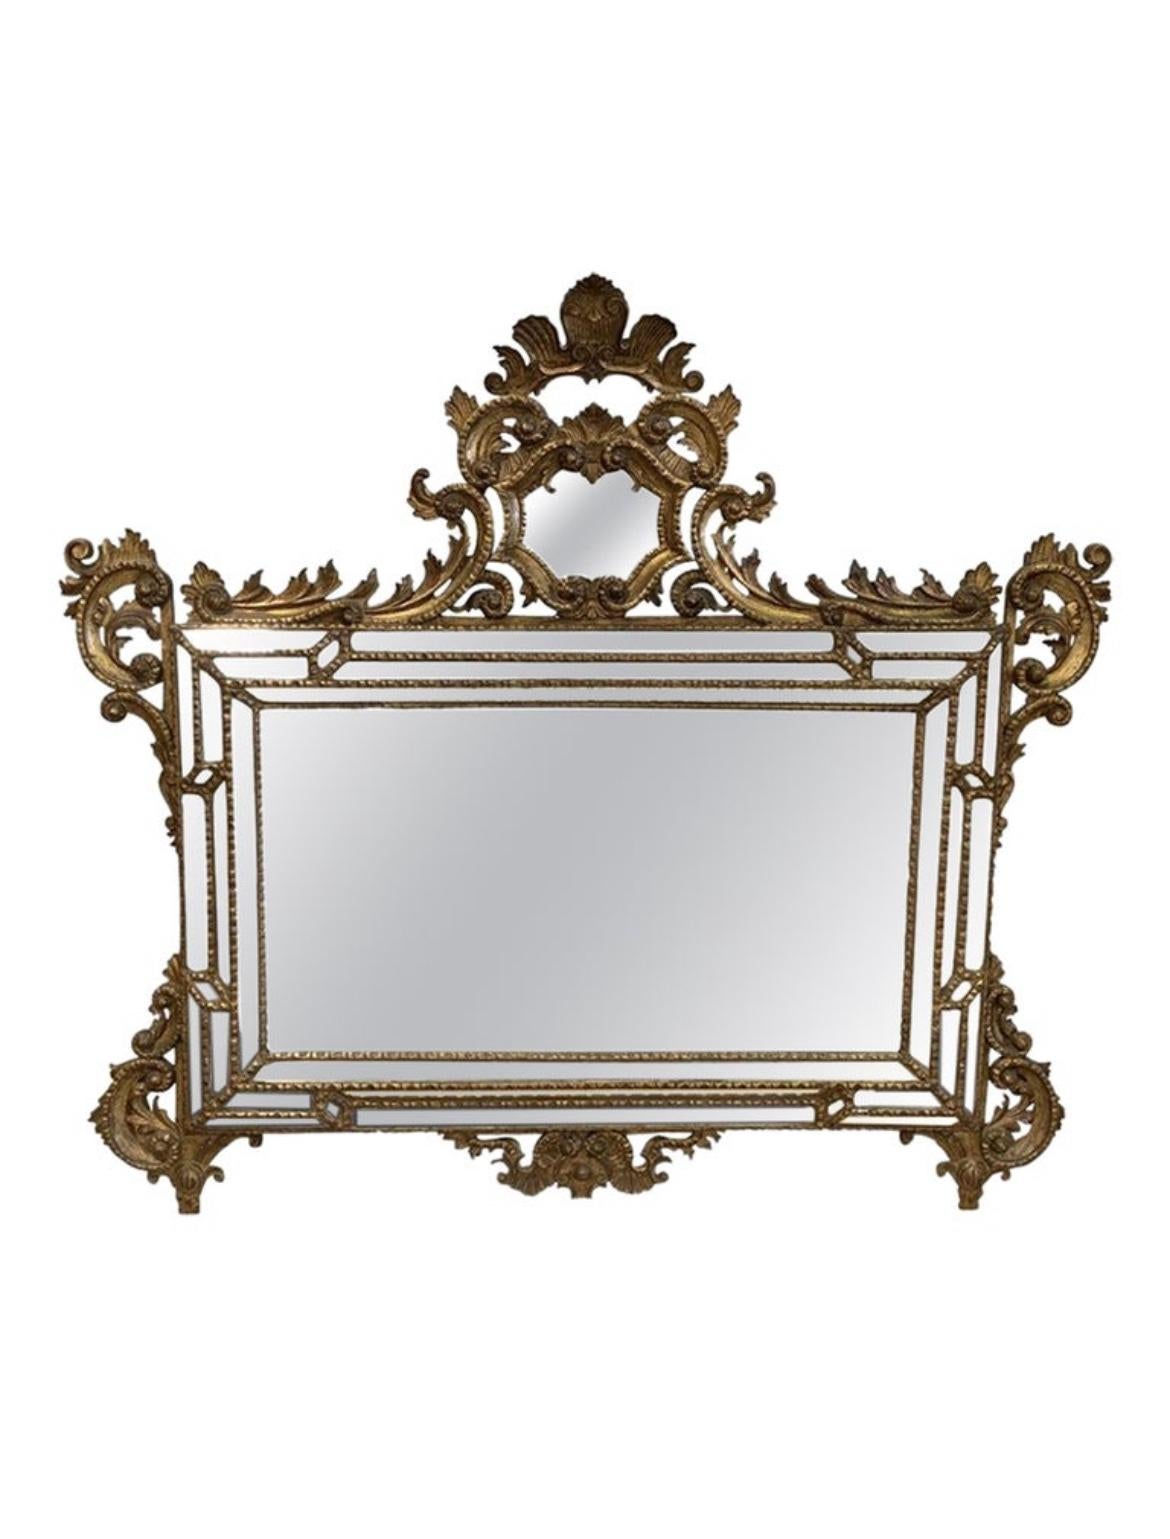 Stunning gold gilt 19th century Italian mirror that is sure to add sophistication to any design space. This mirror has inlaid mirrors on the edge that create a 3D effect. This mirror is sure to fit in any room nicely with this exquisite style and